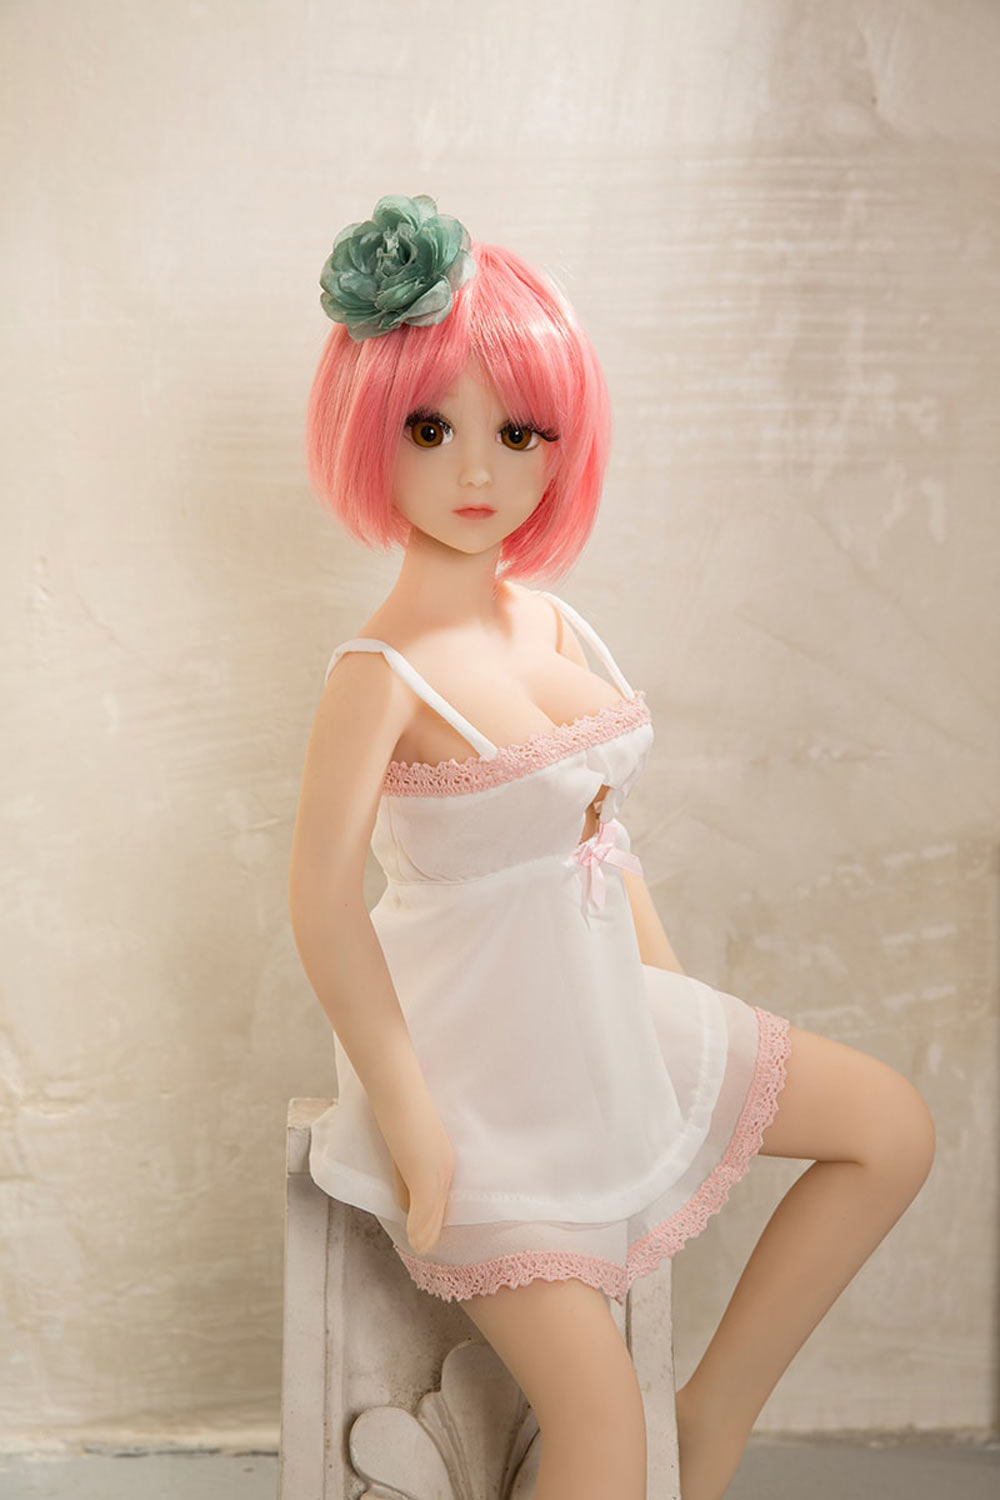 A mini sex doll with short pink hair in a white dress